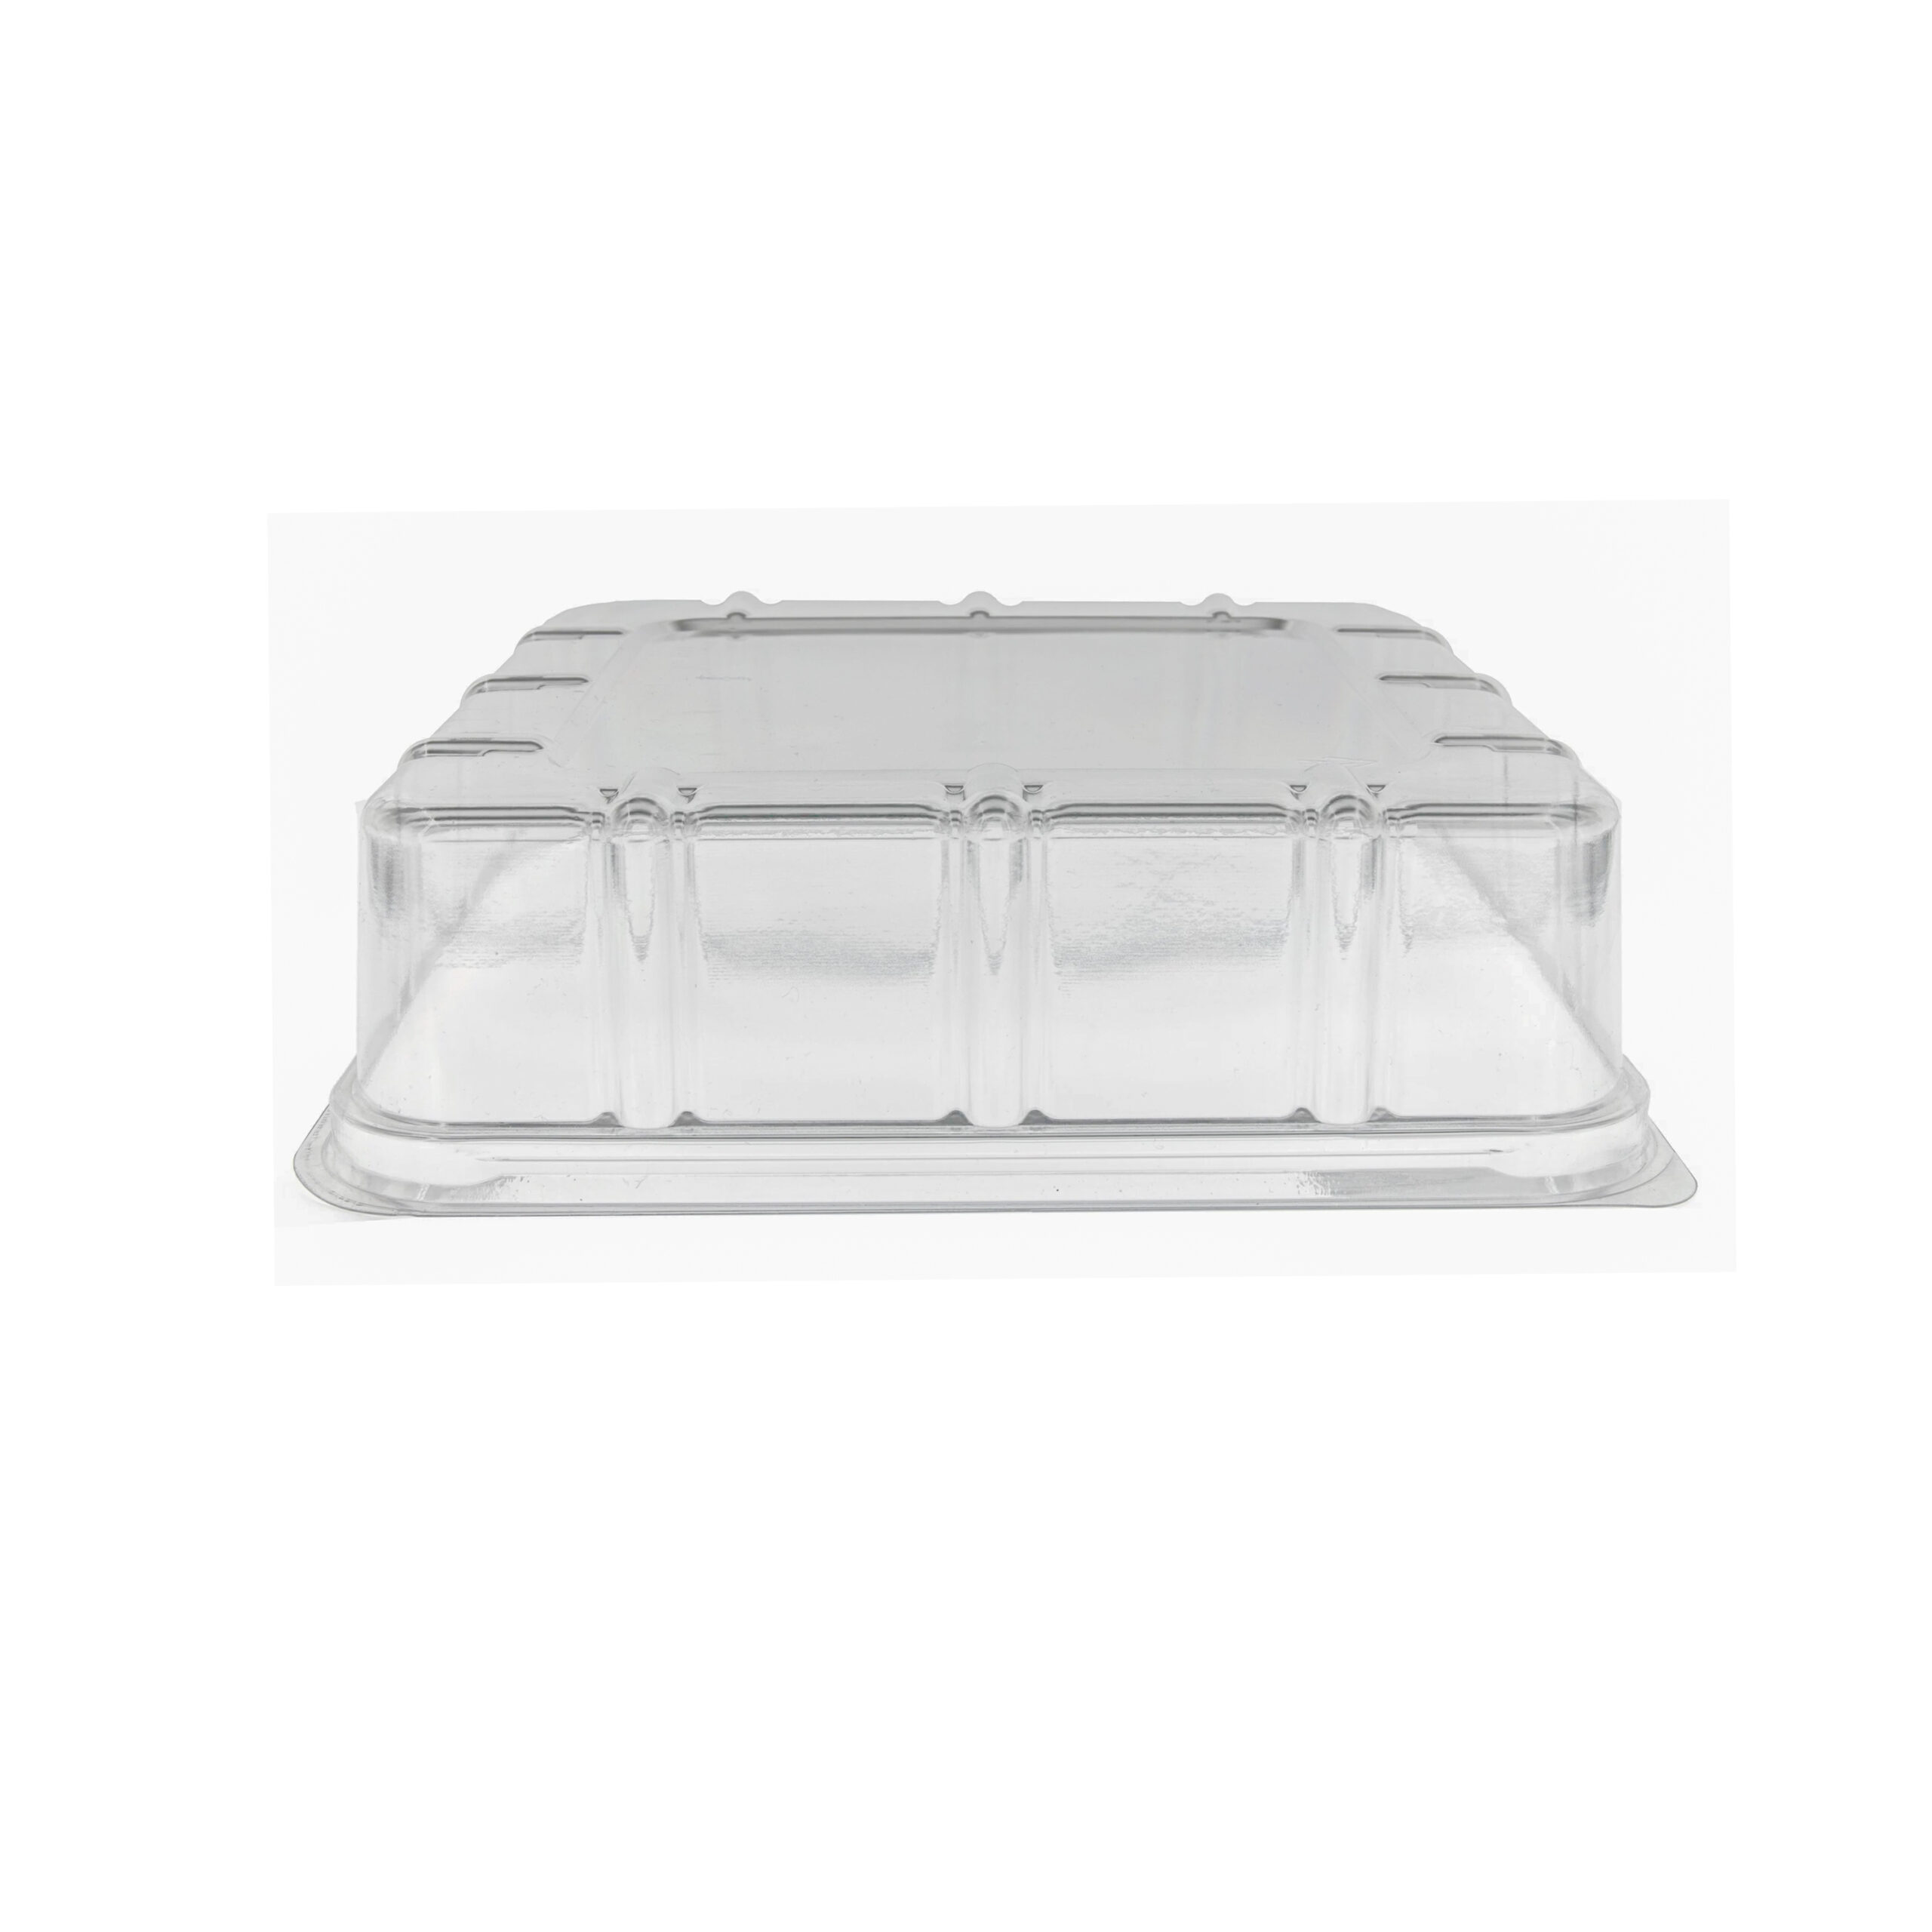 PLASTIC CLEAR
DOME TO FIT 79
TRAY
296x243x50mm
K79D (1x100)